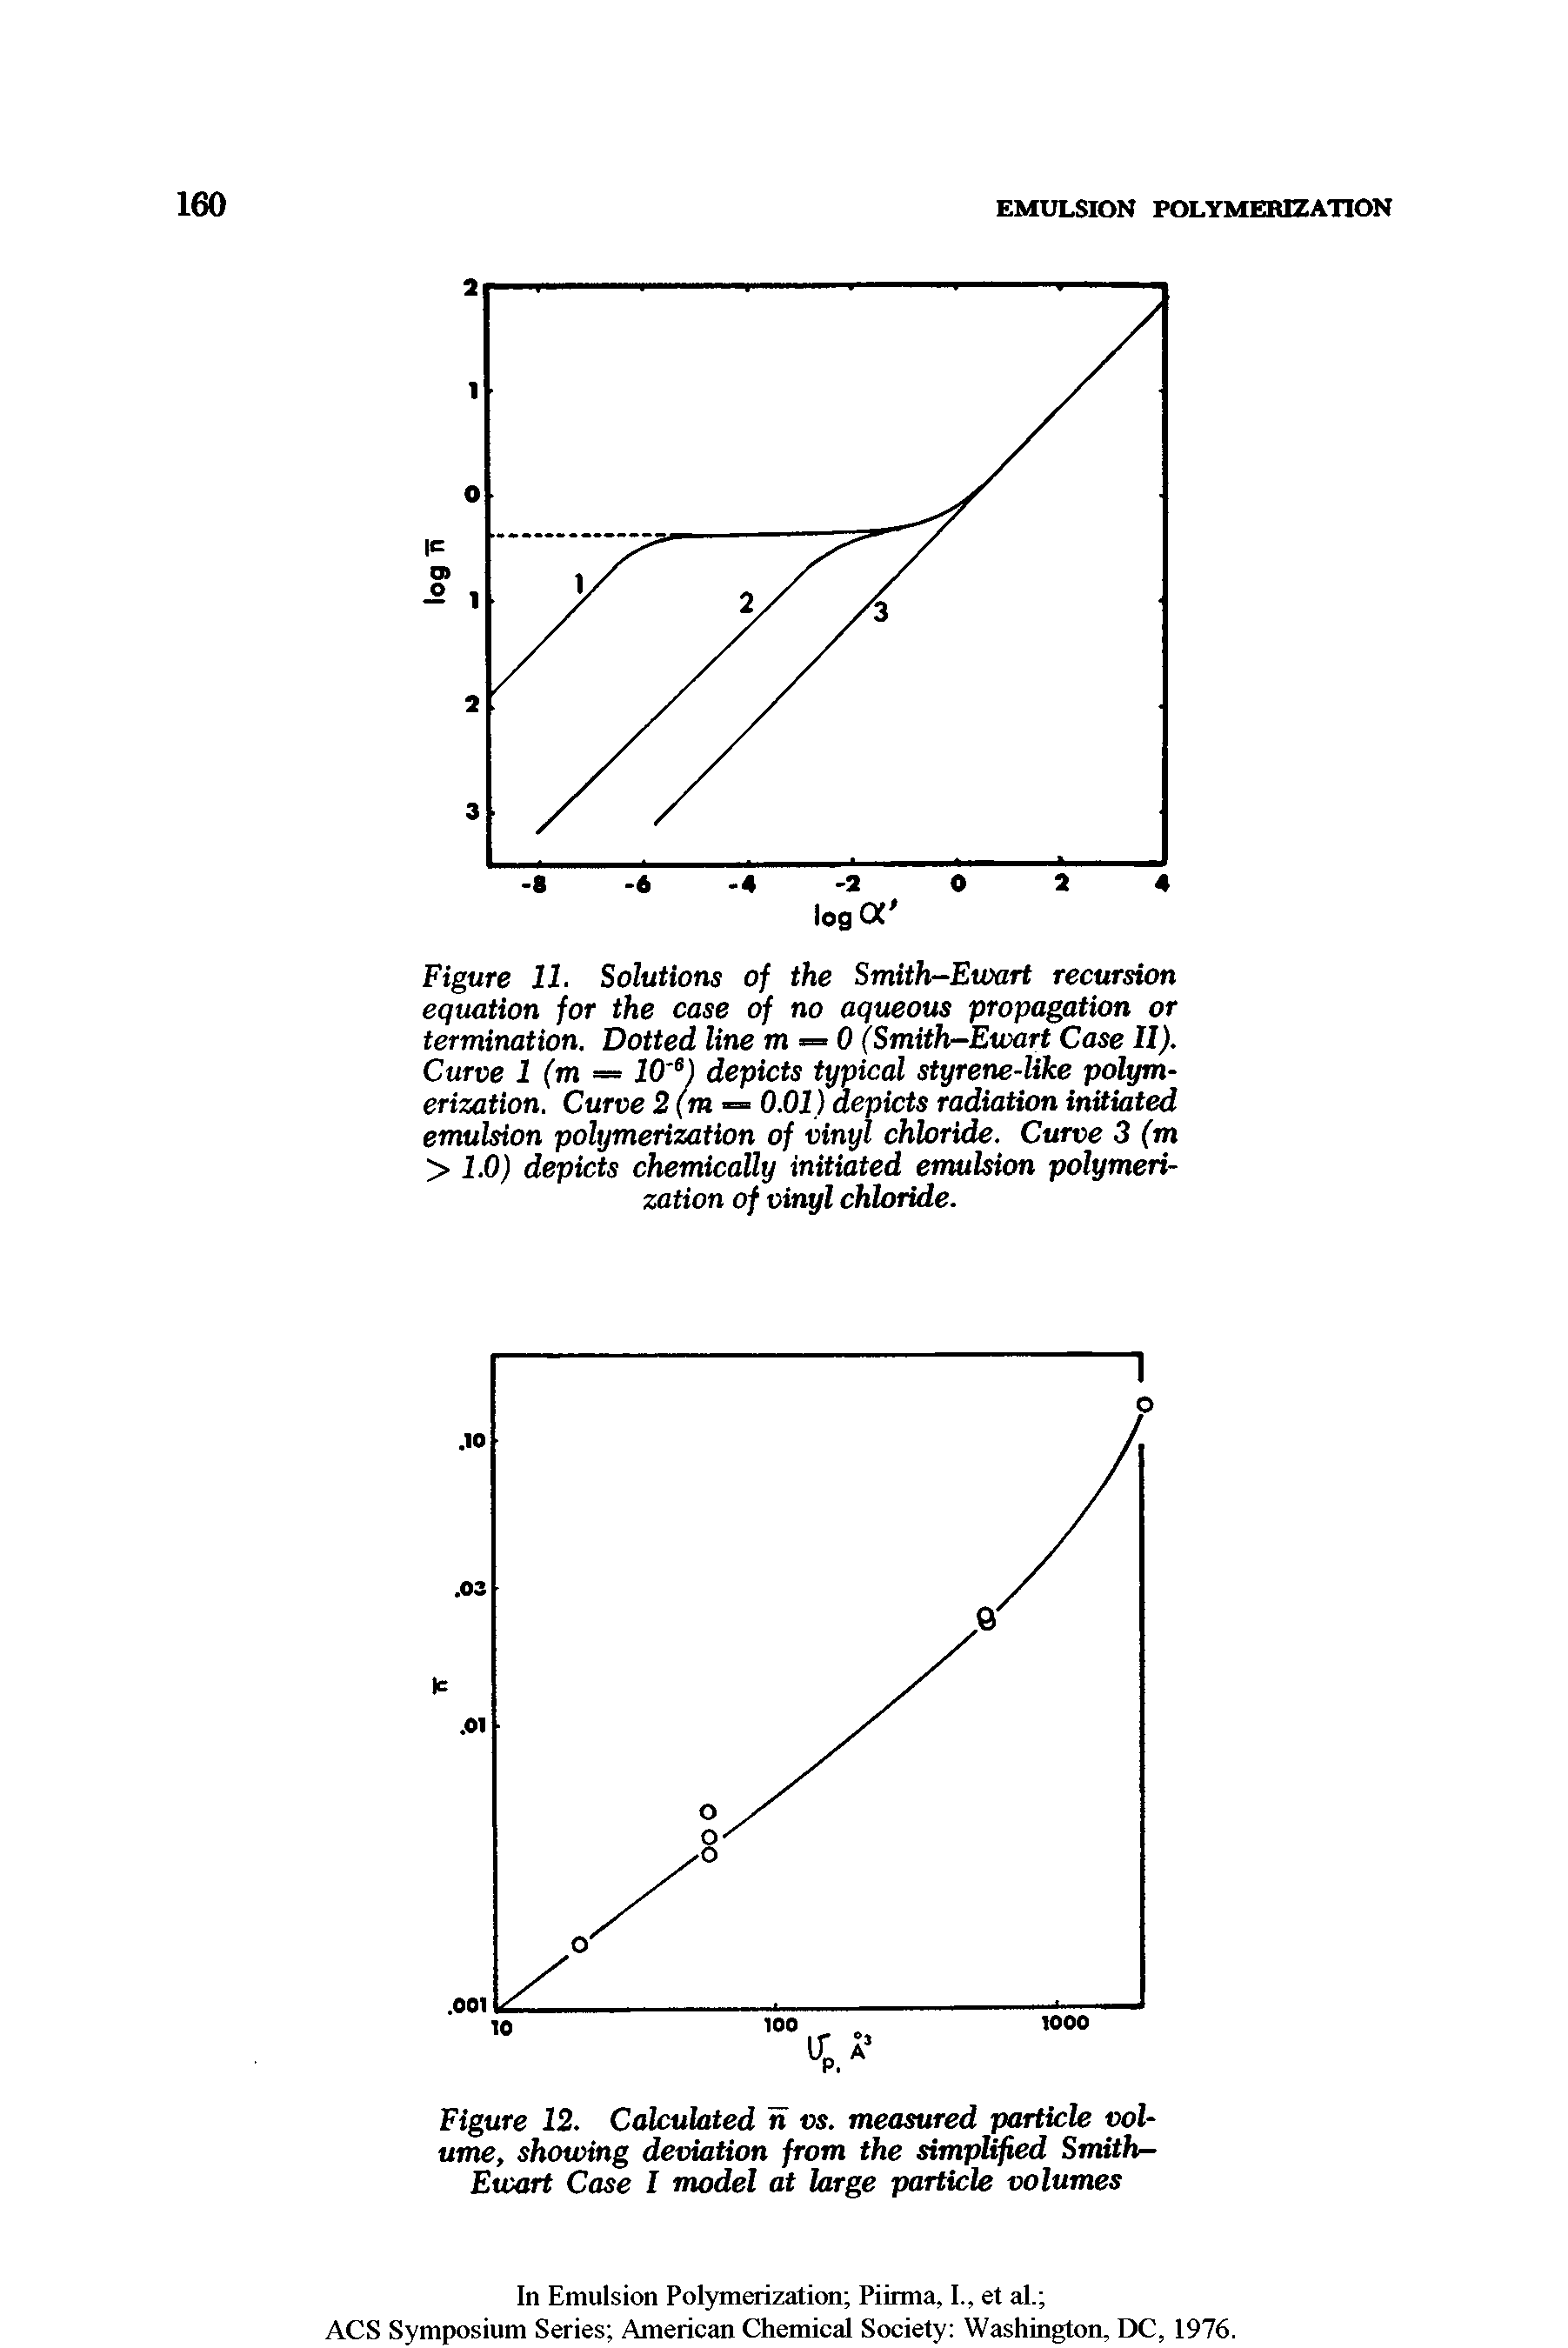 Figure 11. Solutions of the Smith-Ewart recursion equation for the case of no aqueom propagation or termination. Dotted line m = 0 (Smith-Ewart Case II). Curve 1 (m = 10 ) depicts typical styrene-like polymerization. Curve 2(m = 0.01) depicts radiation initiated emulsion polymerization of vinyl chloride. Curve 3 (m > 1.0) depicts chemically initiated emulsion polymerization of vinyl chloride.